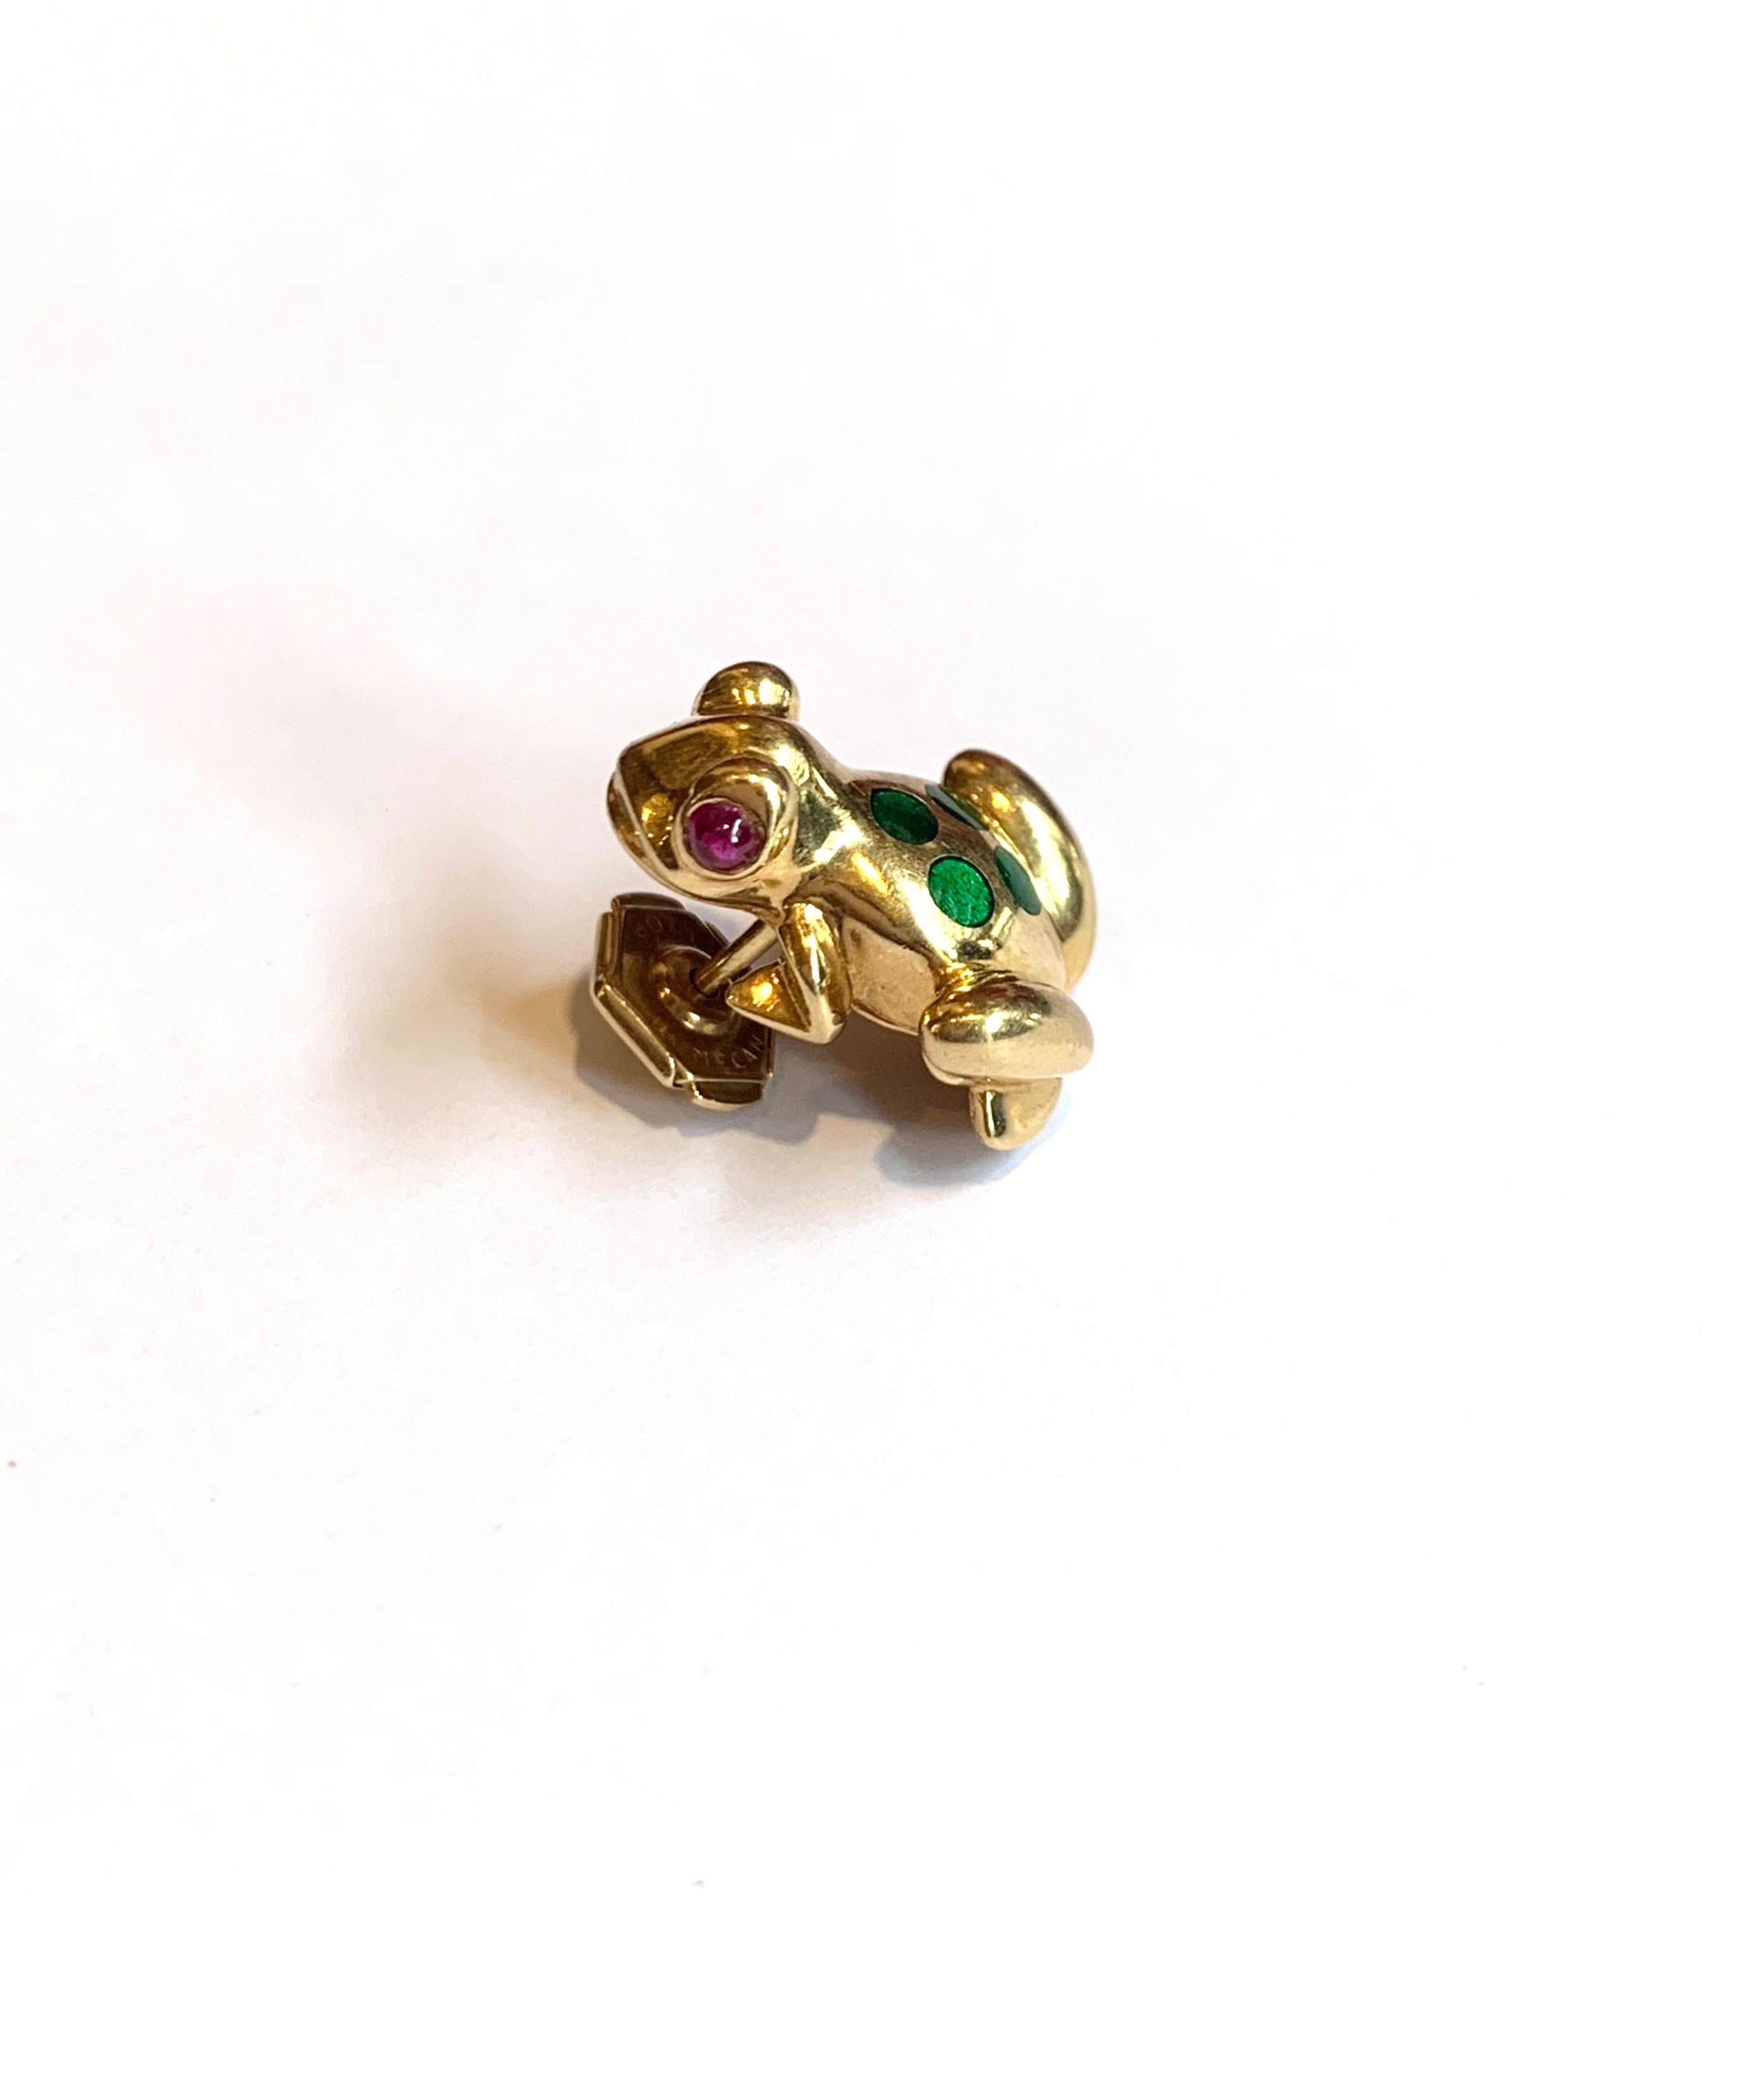 Cute and lovely Lapel pin signed Cartier depicting a yellow gold frog set with cabochon rubies for the eyes and enamel on the back.

Signed and Numbered and dated 1992

Dimensions : 1.6 x 1.2 cm (0.63 x 0.47 inch)

18 karat yellow gold,